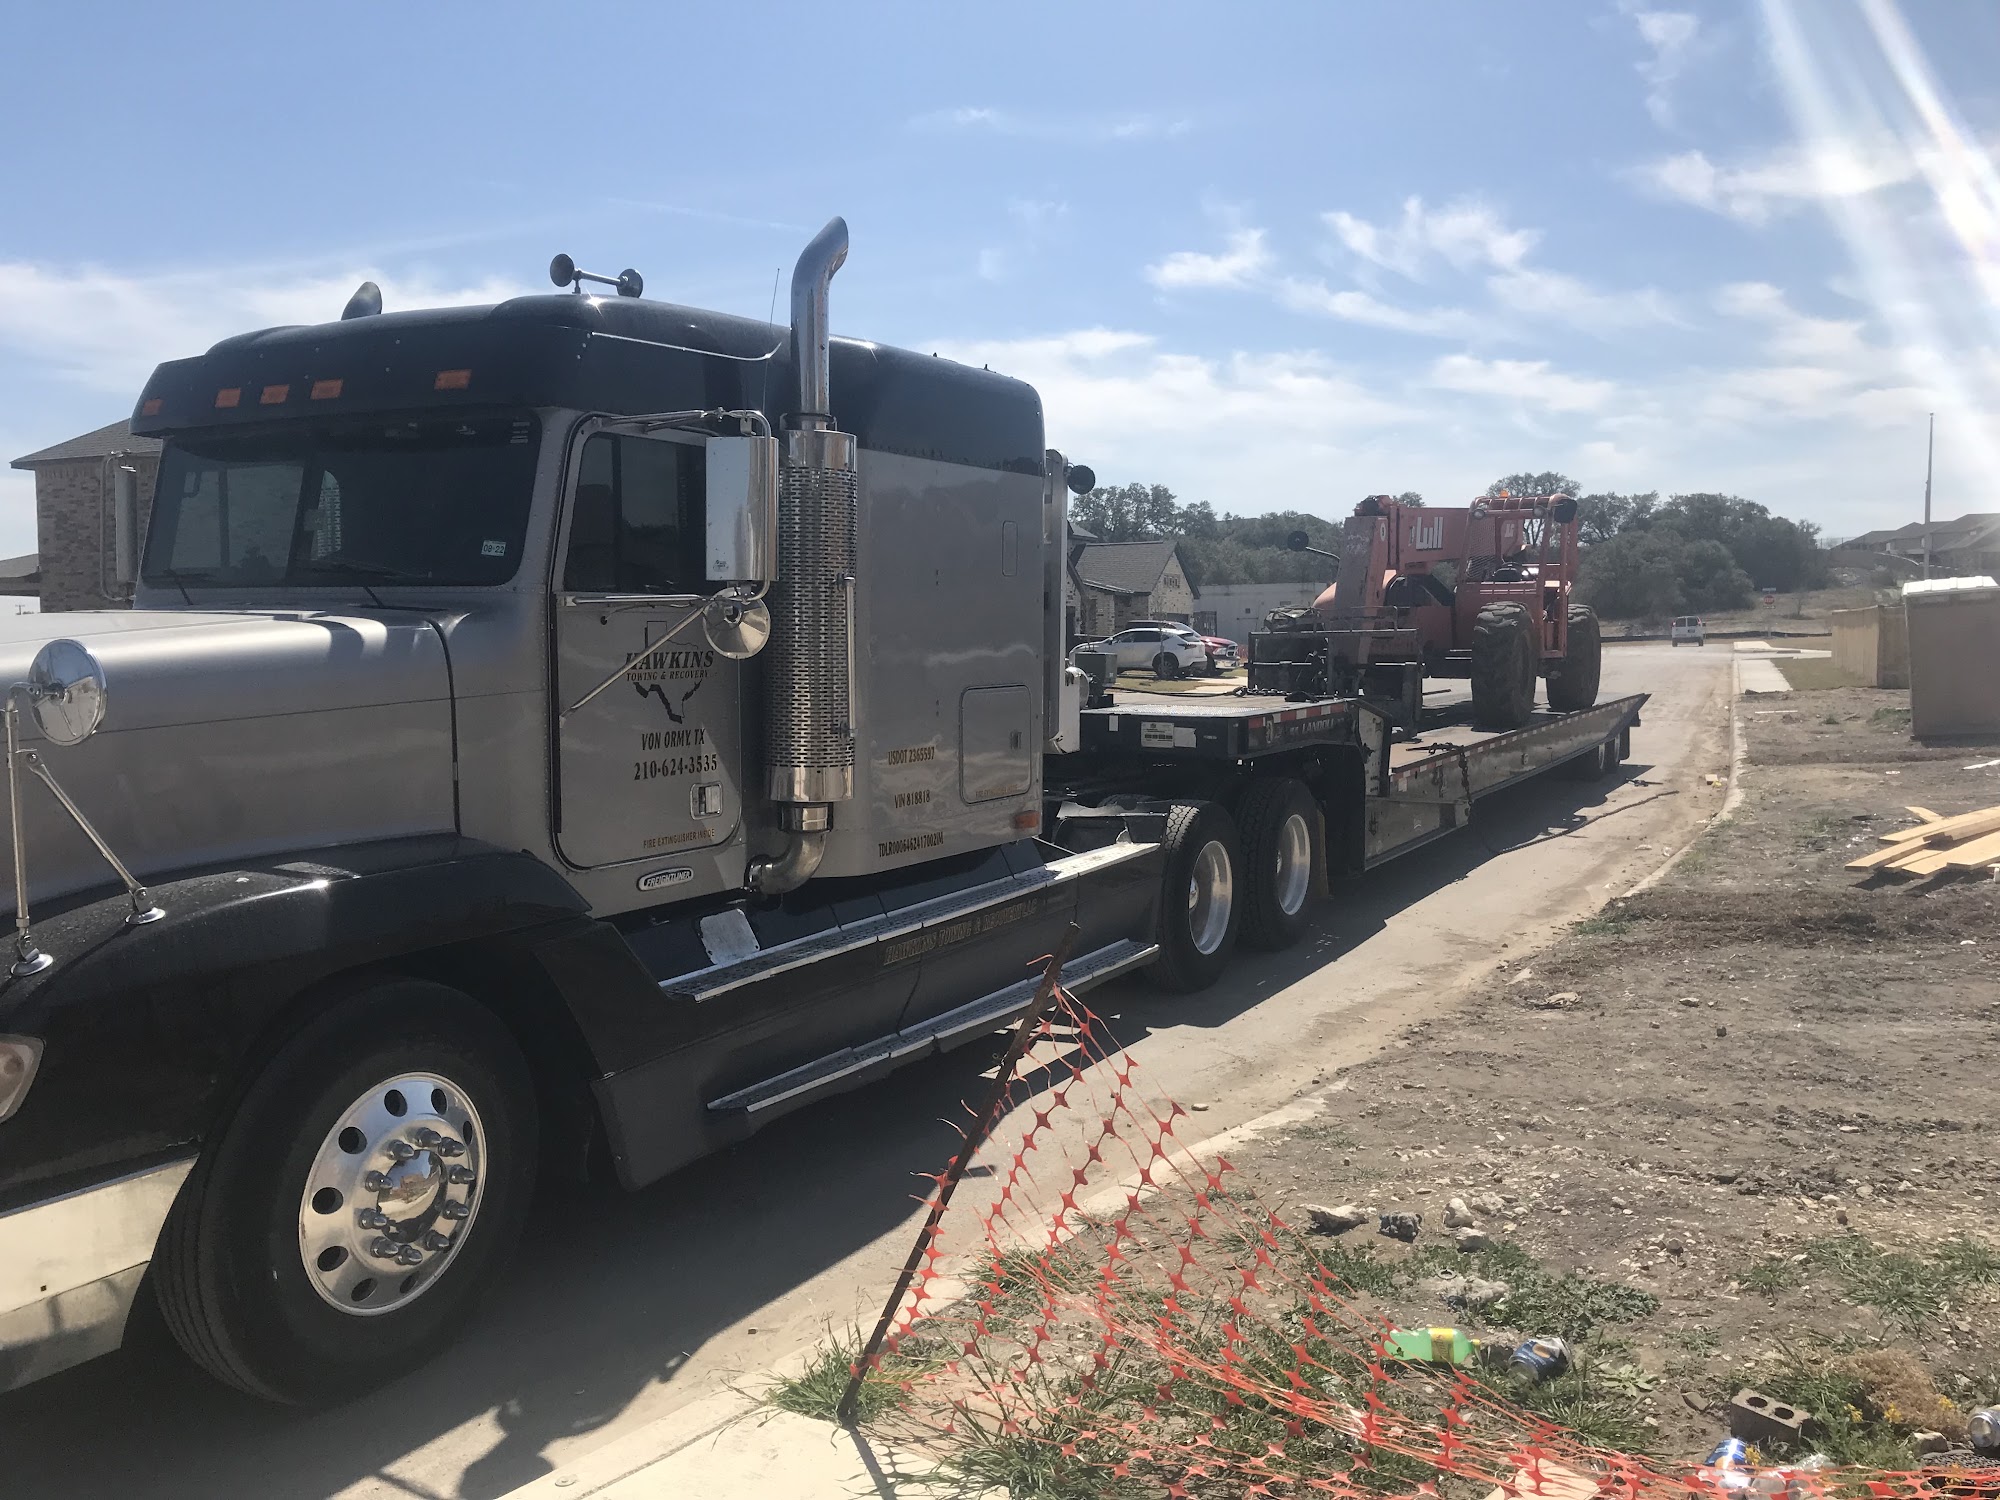 Hawkins Towing & Recovery 20222 TX-16 S, Von Ormy Texas 78073